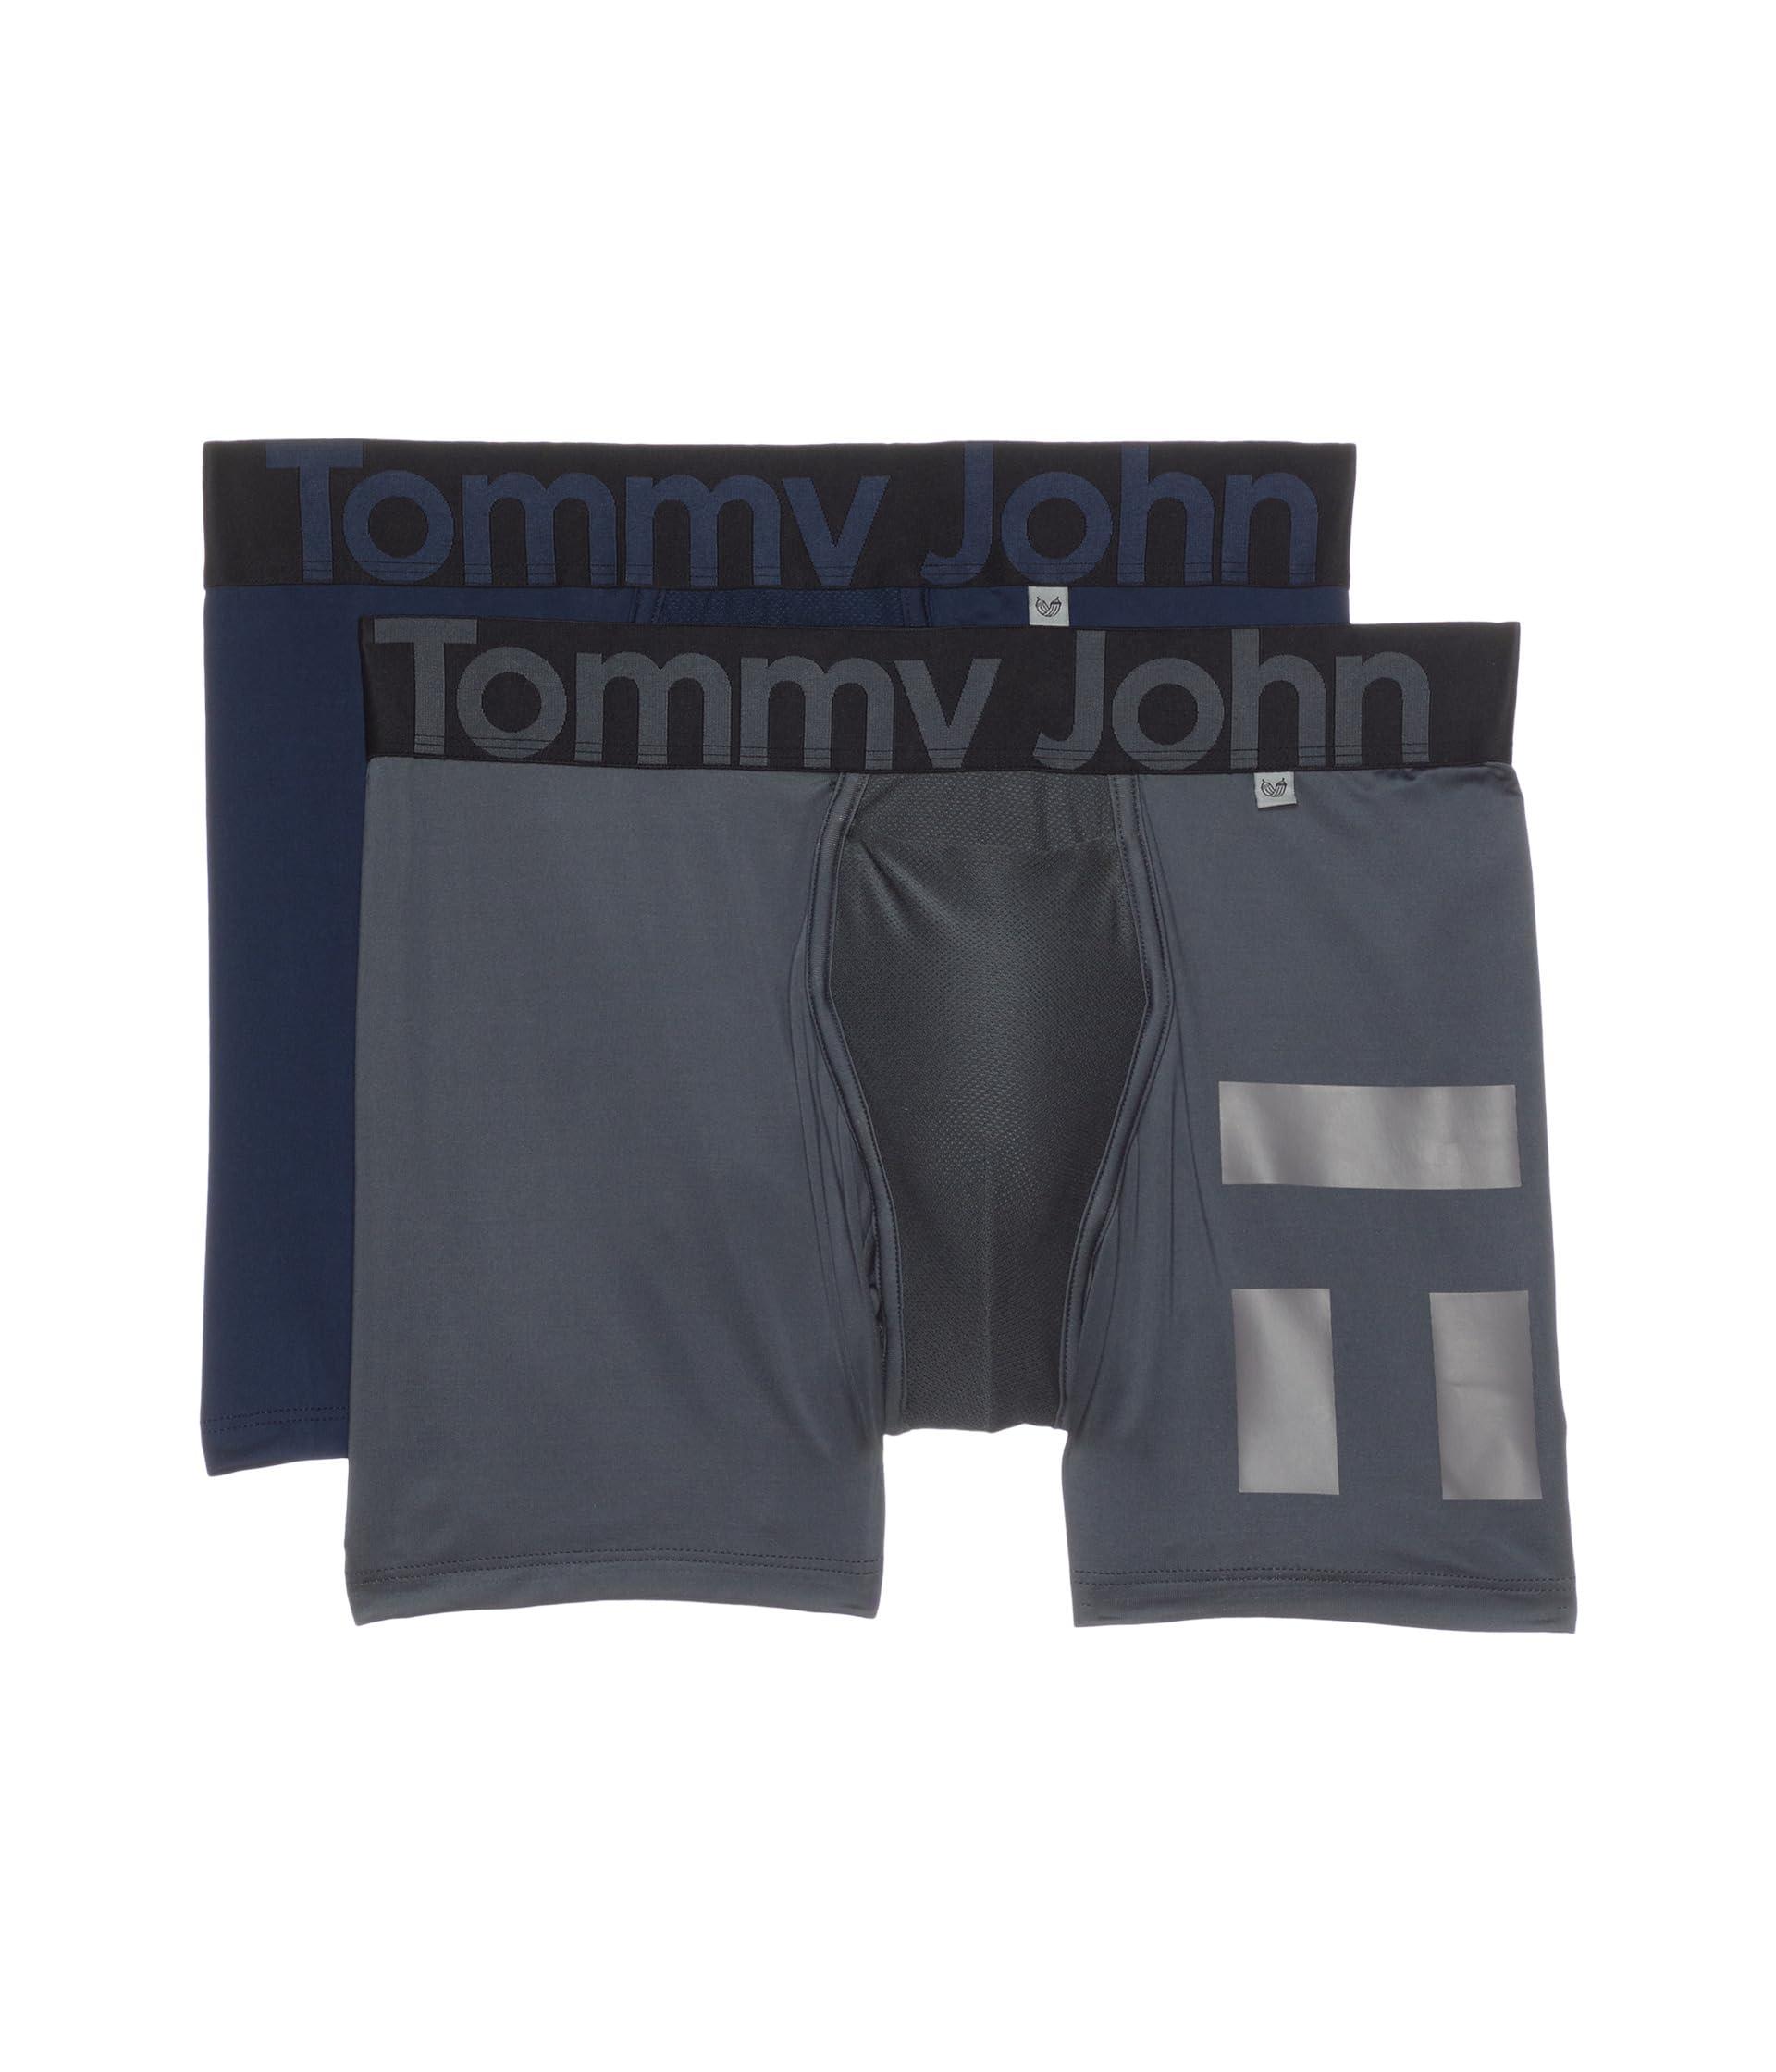 Tommy John 360 Sport Hammock Pouch 4 Boxer Brief 2-pack in Blue